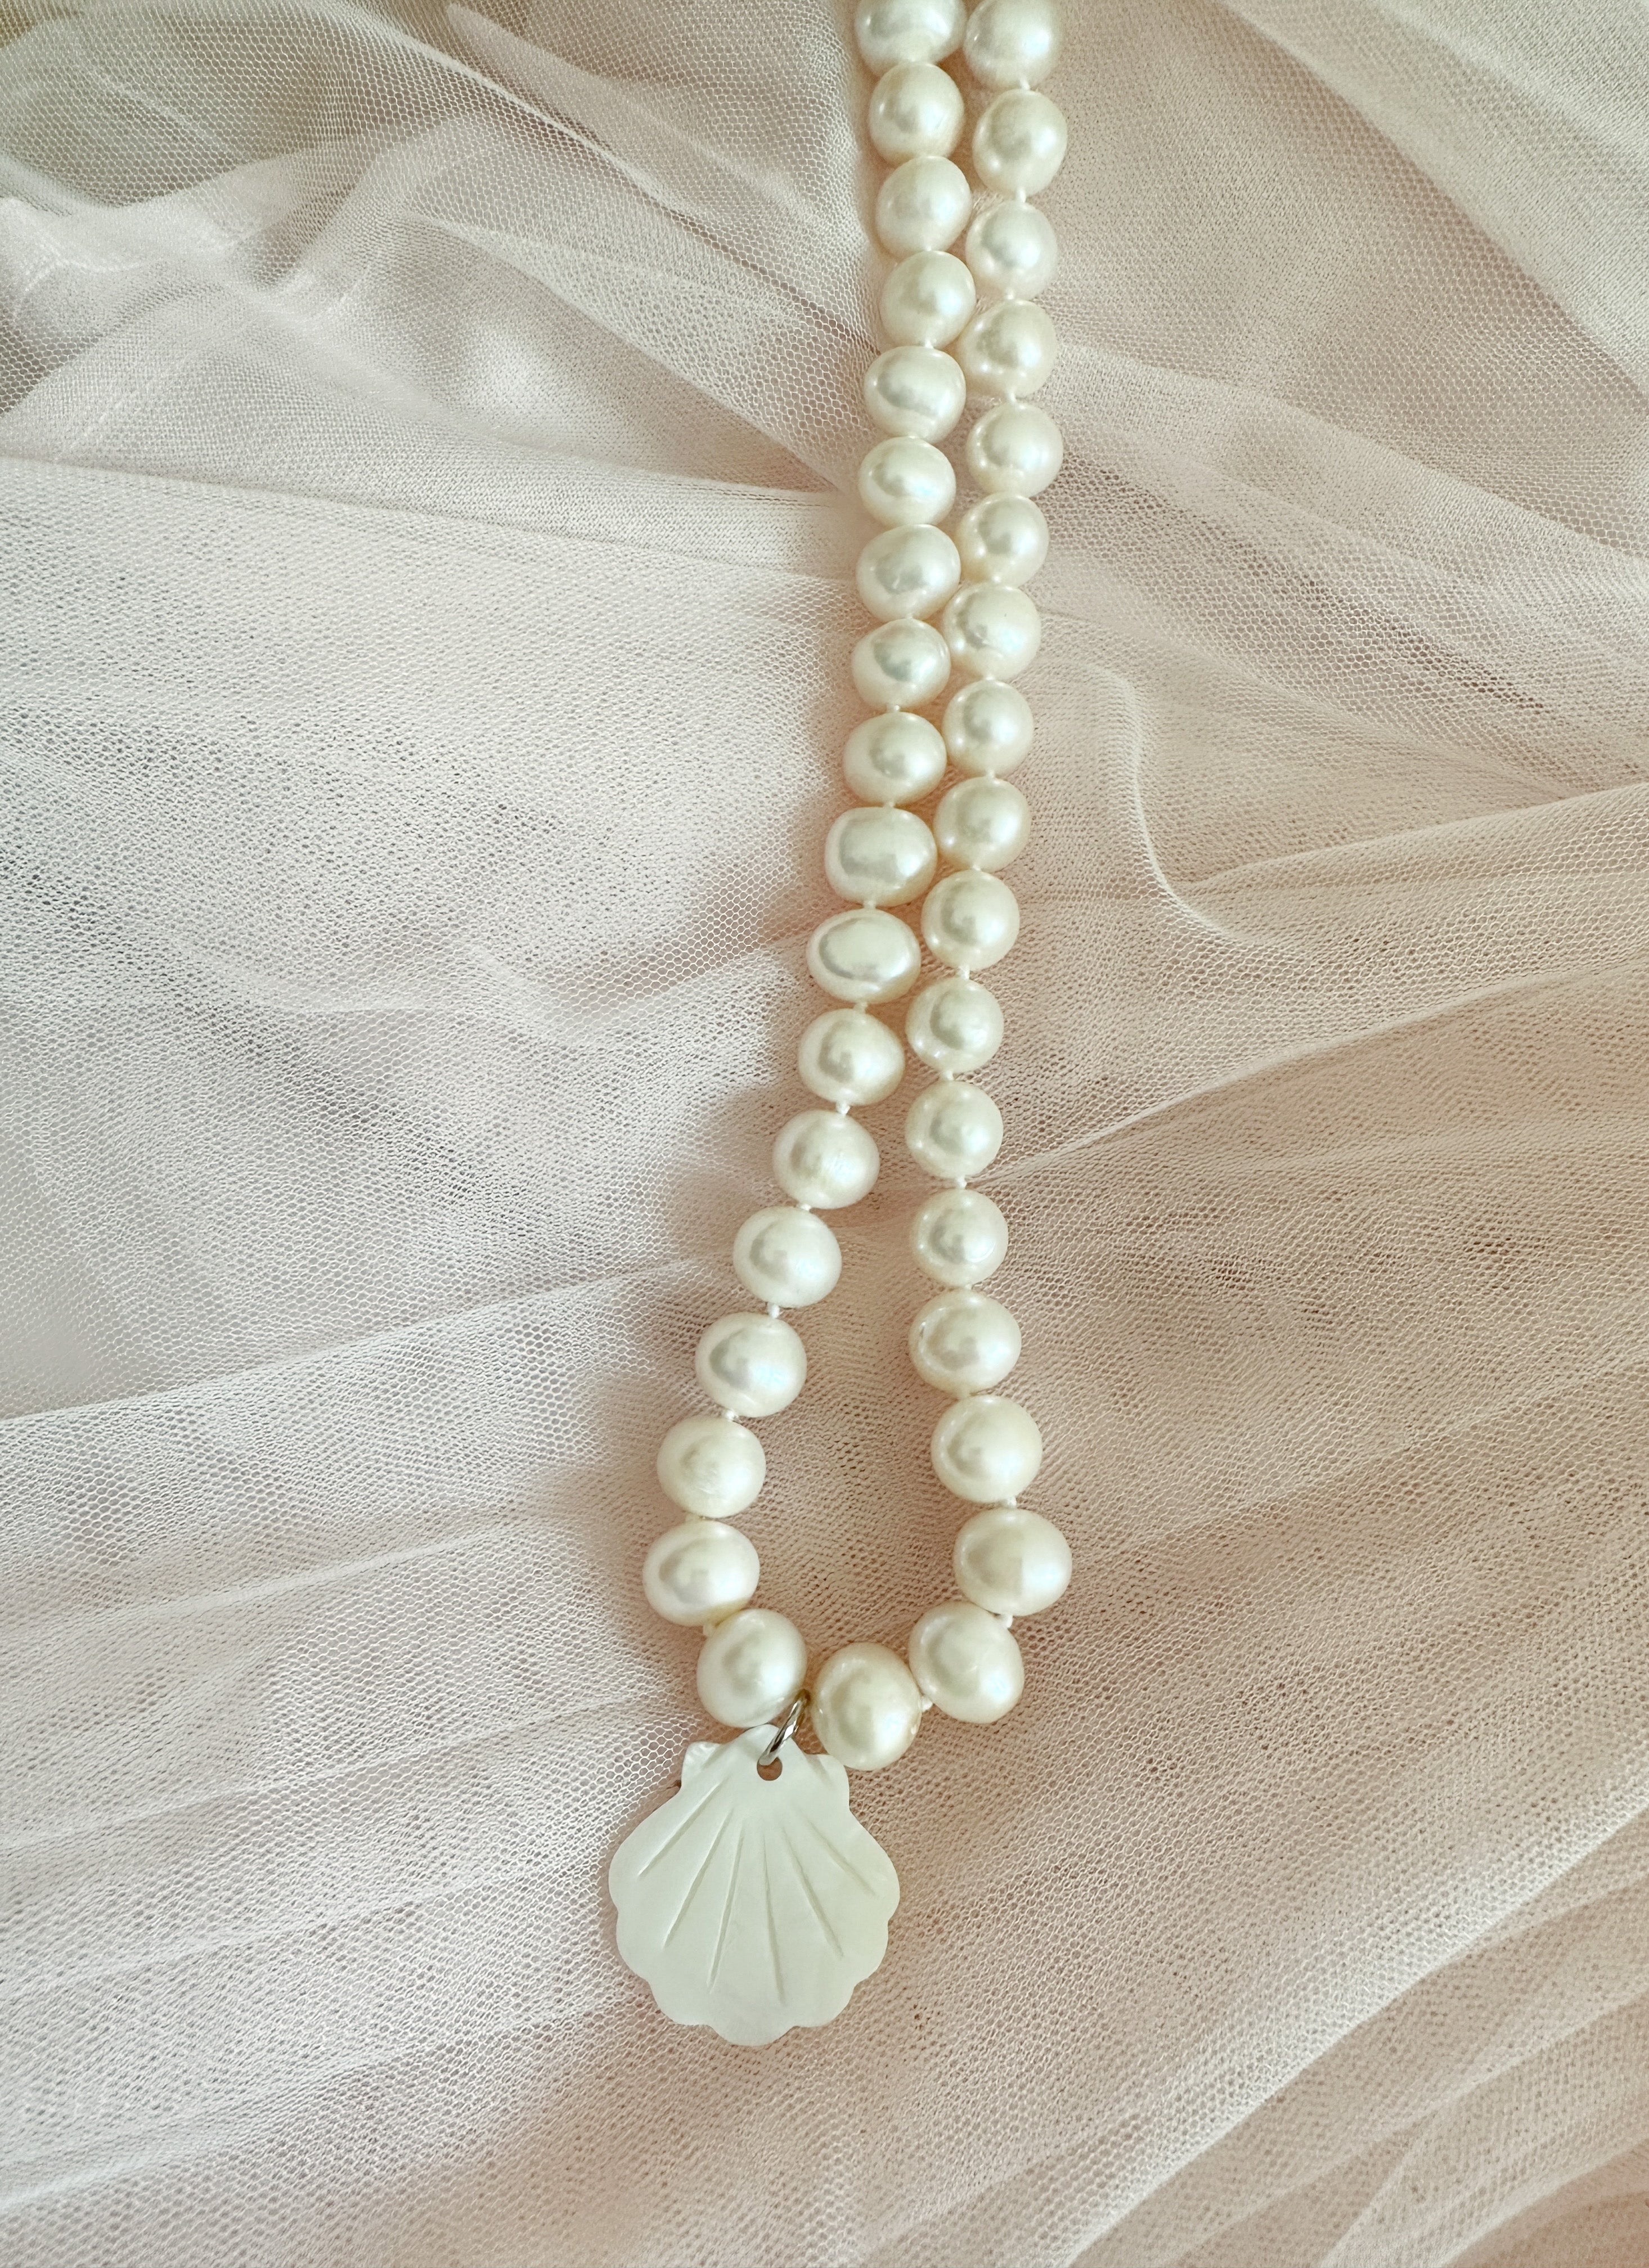 The “Mother Of Pearl Shell” Freshwater Pearl Necklace